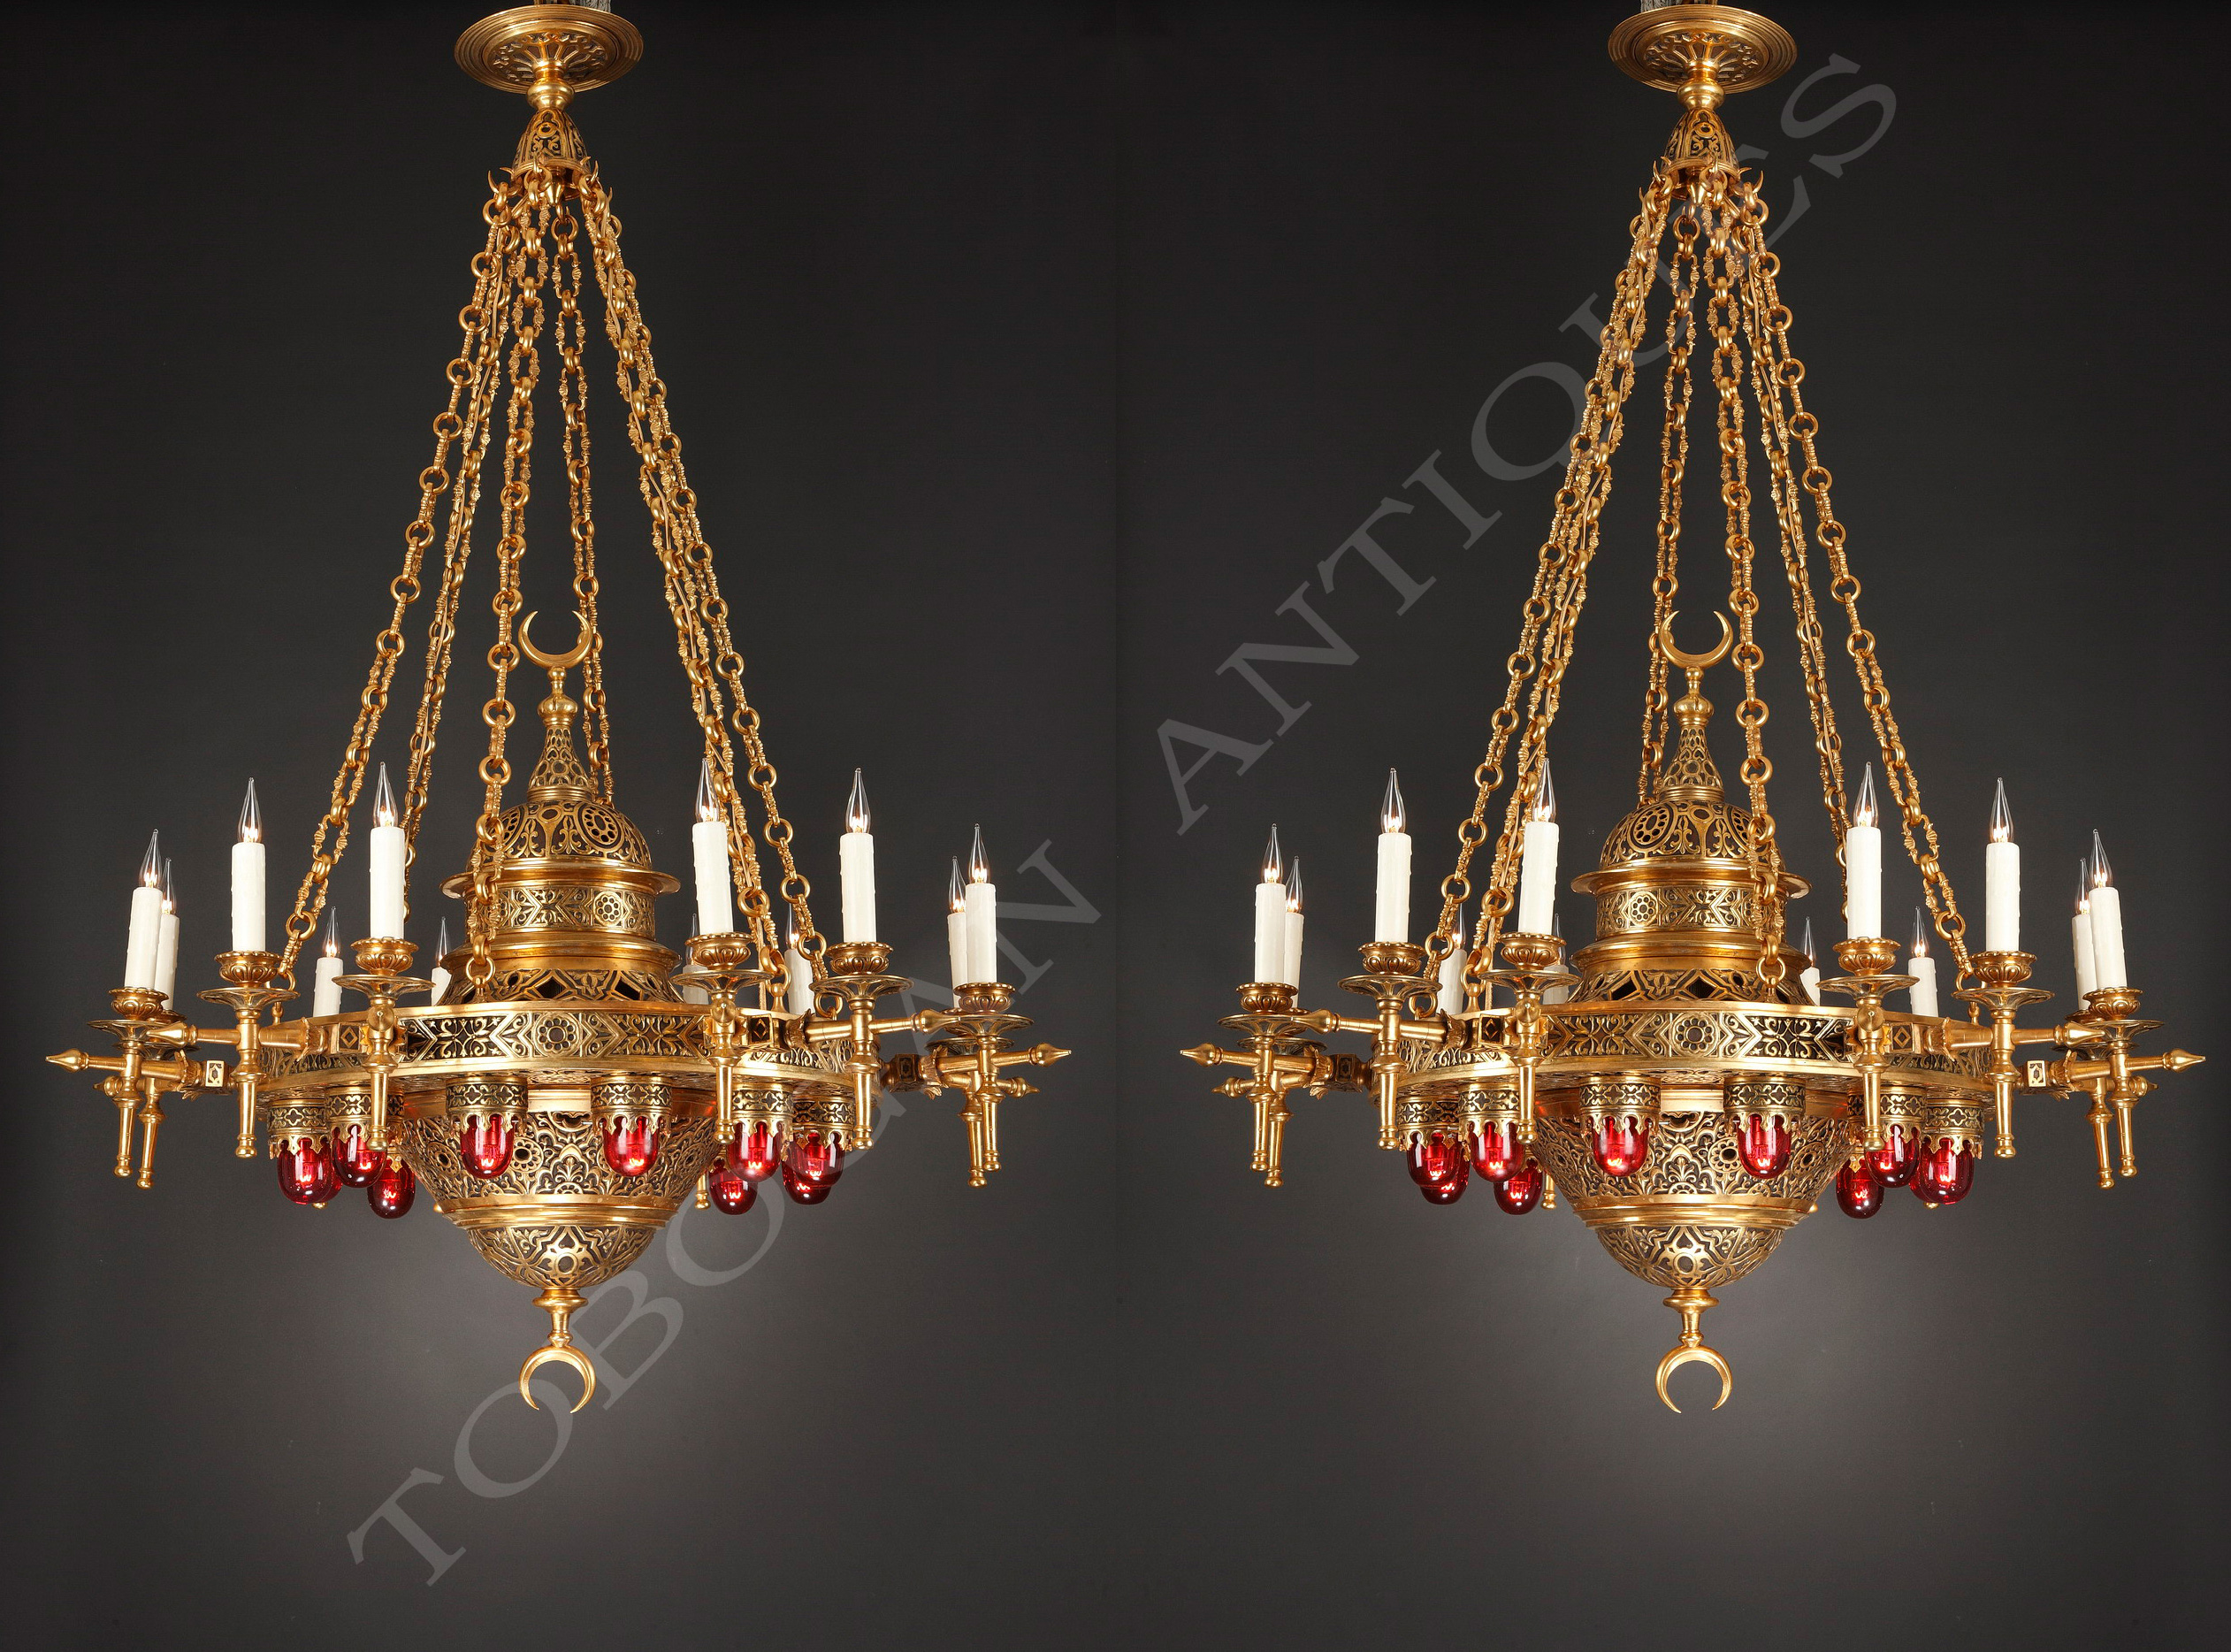 Important pair of oriental style chandeliers